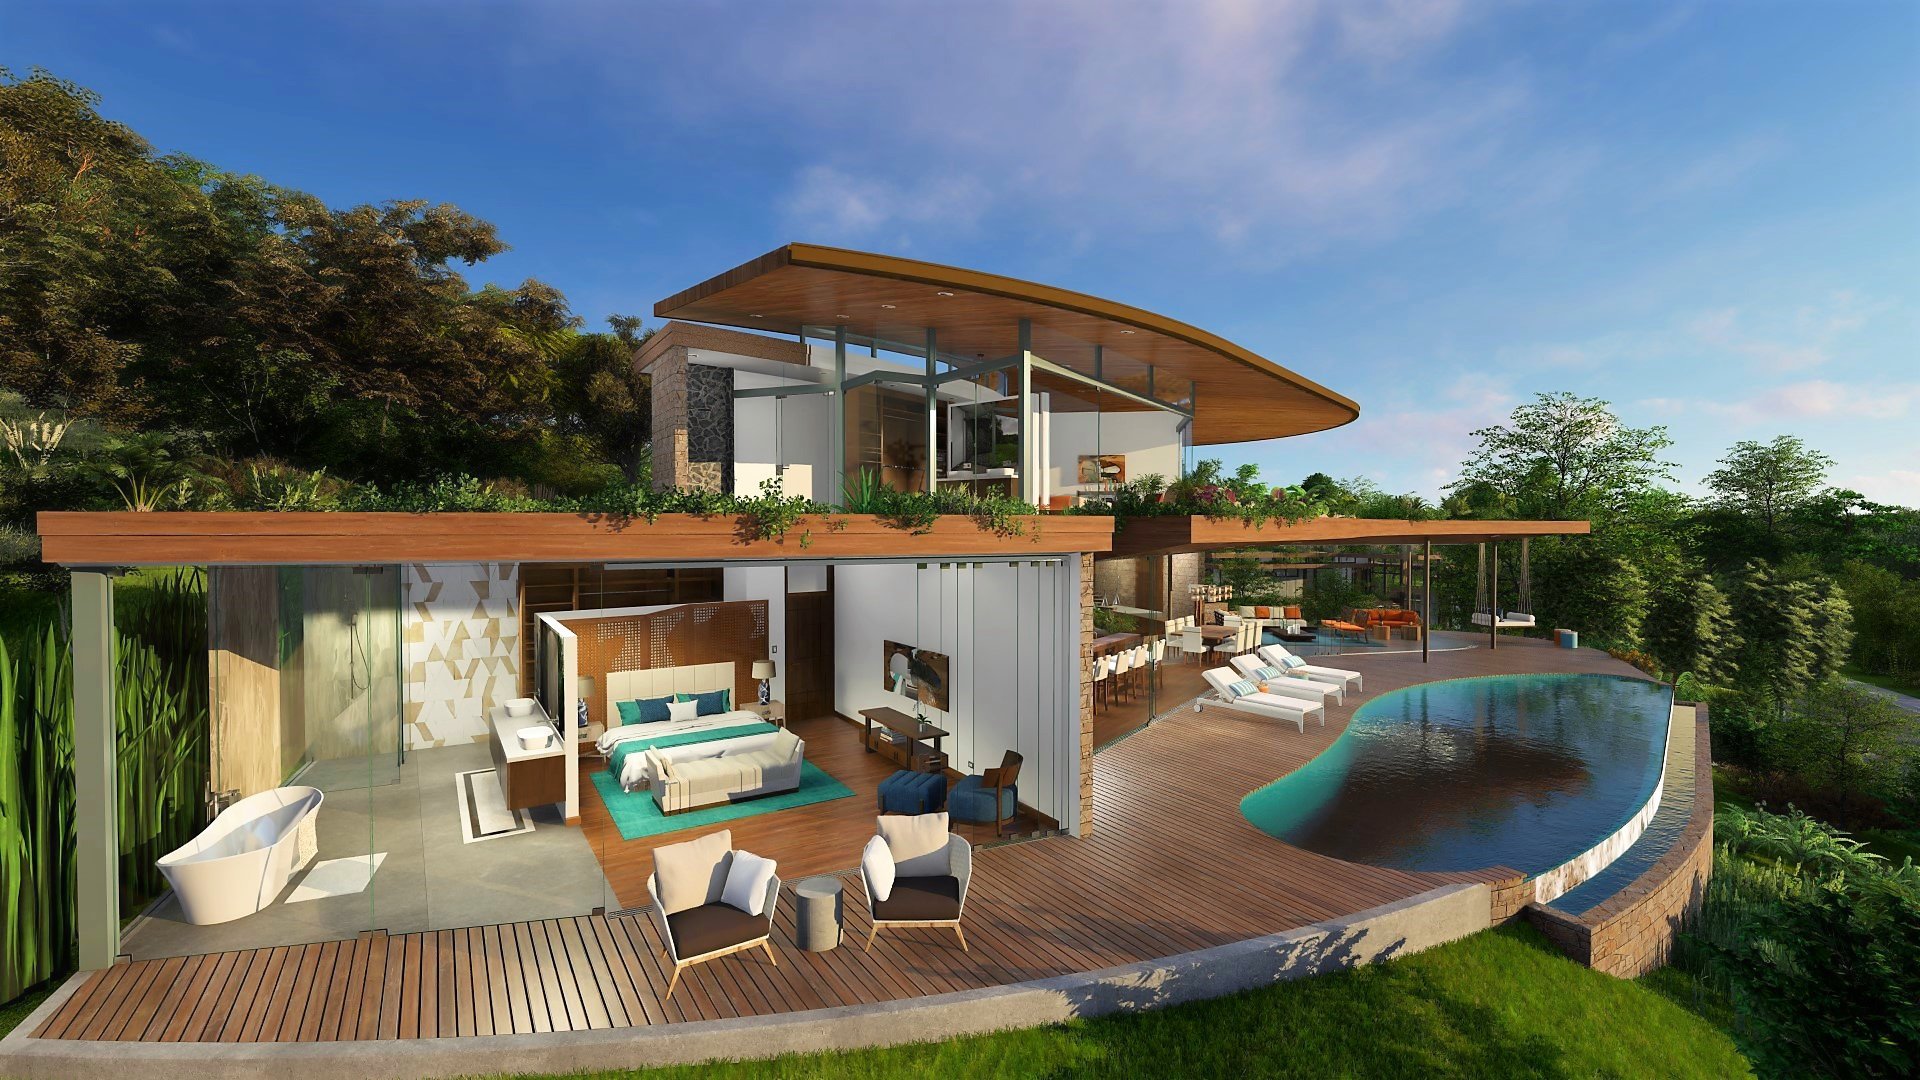 7219-The luxury architect home for sale in Playa Grande, Costa Rica